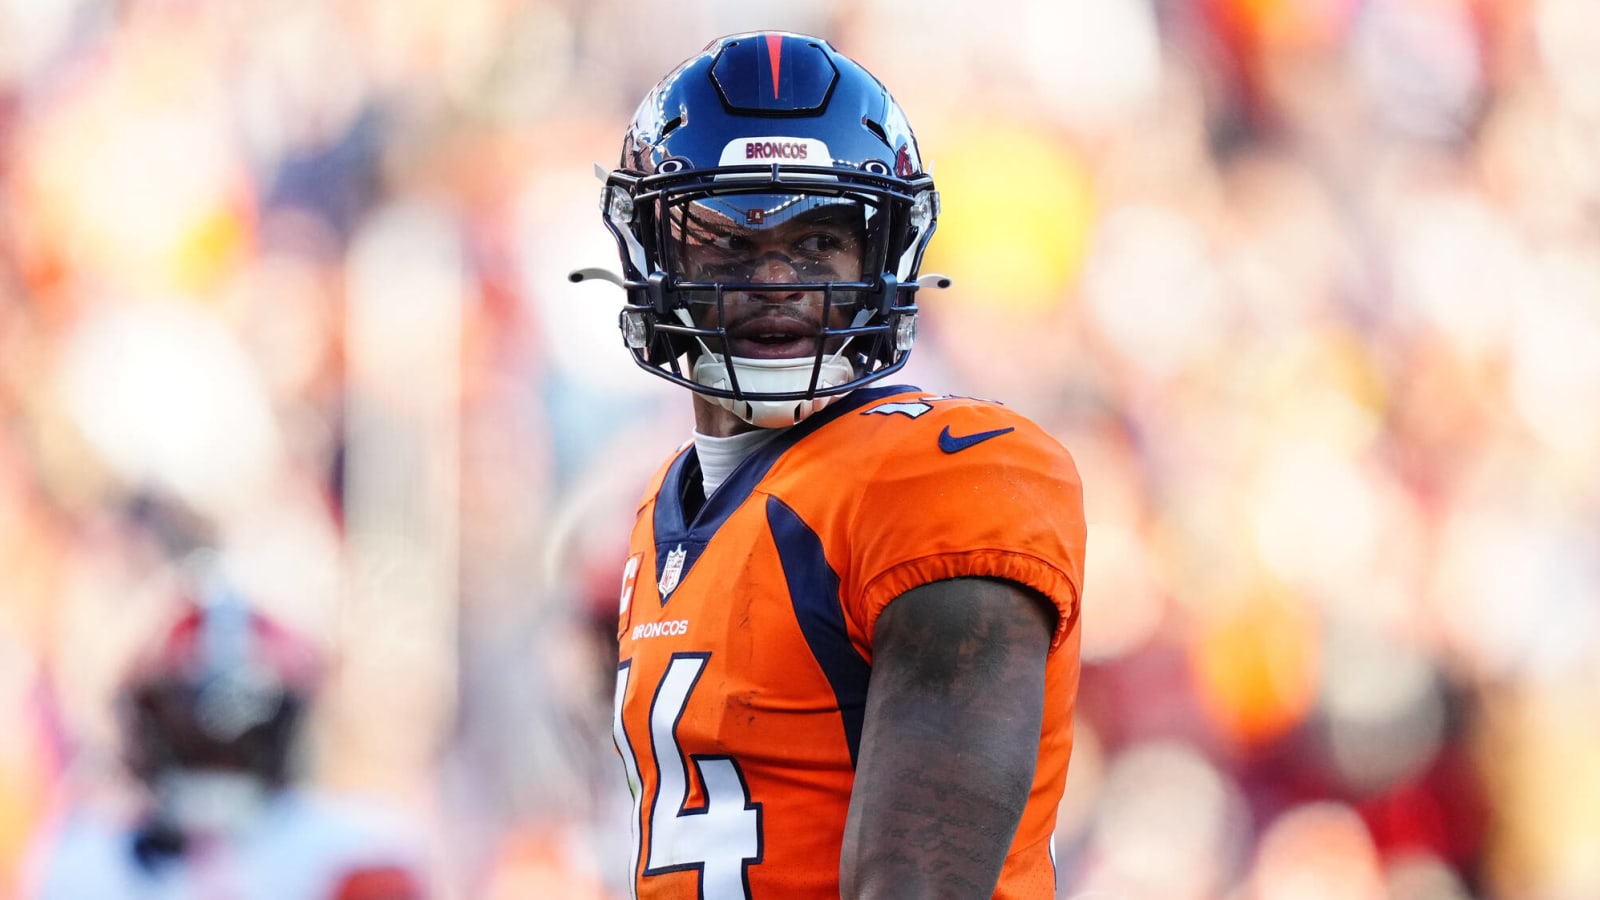 Broncos GM downplays star wideout's holdout